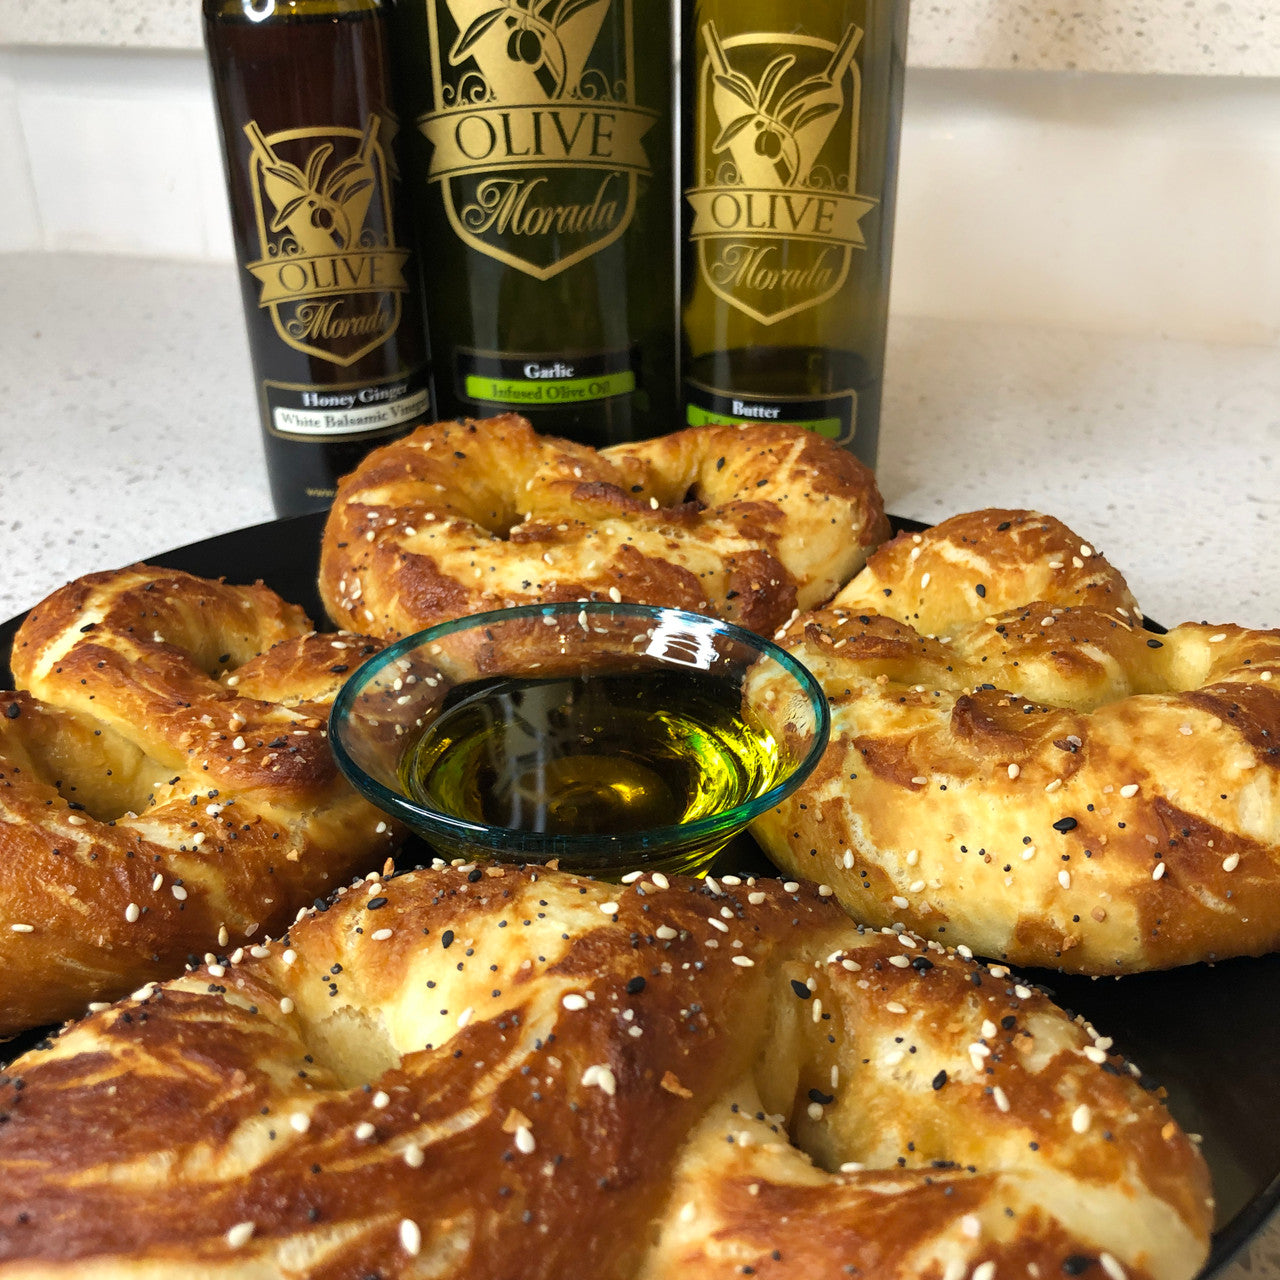 Honey Ginger Balsamic pairs perfectly with Garlic Olive Oil as a dip for these amazing homemade soft pretzels 